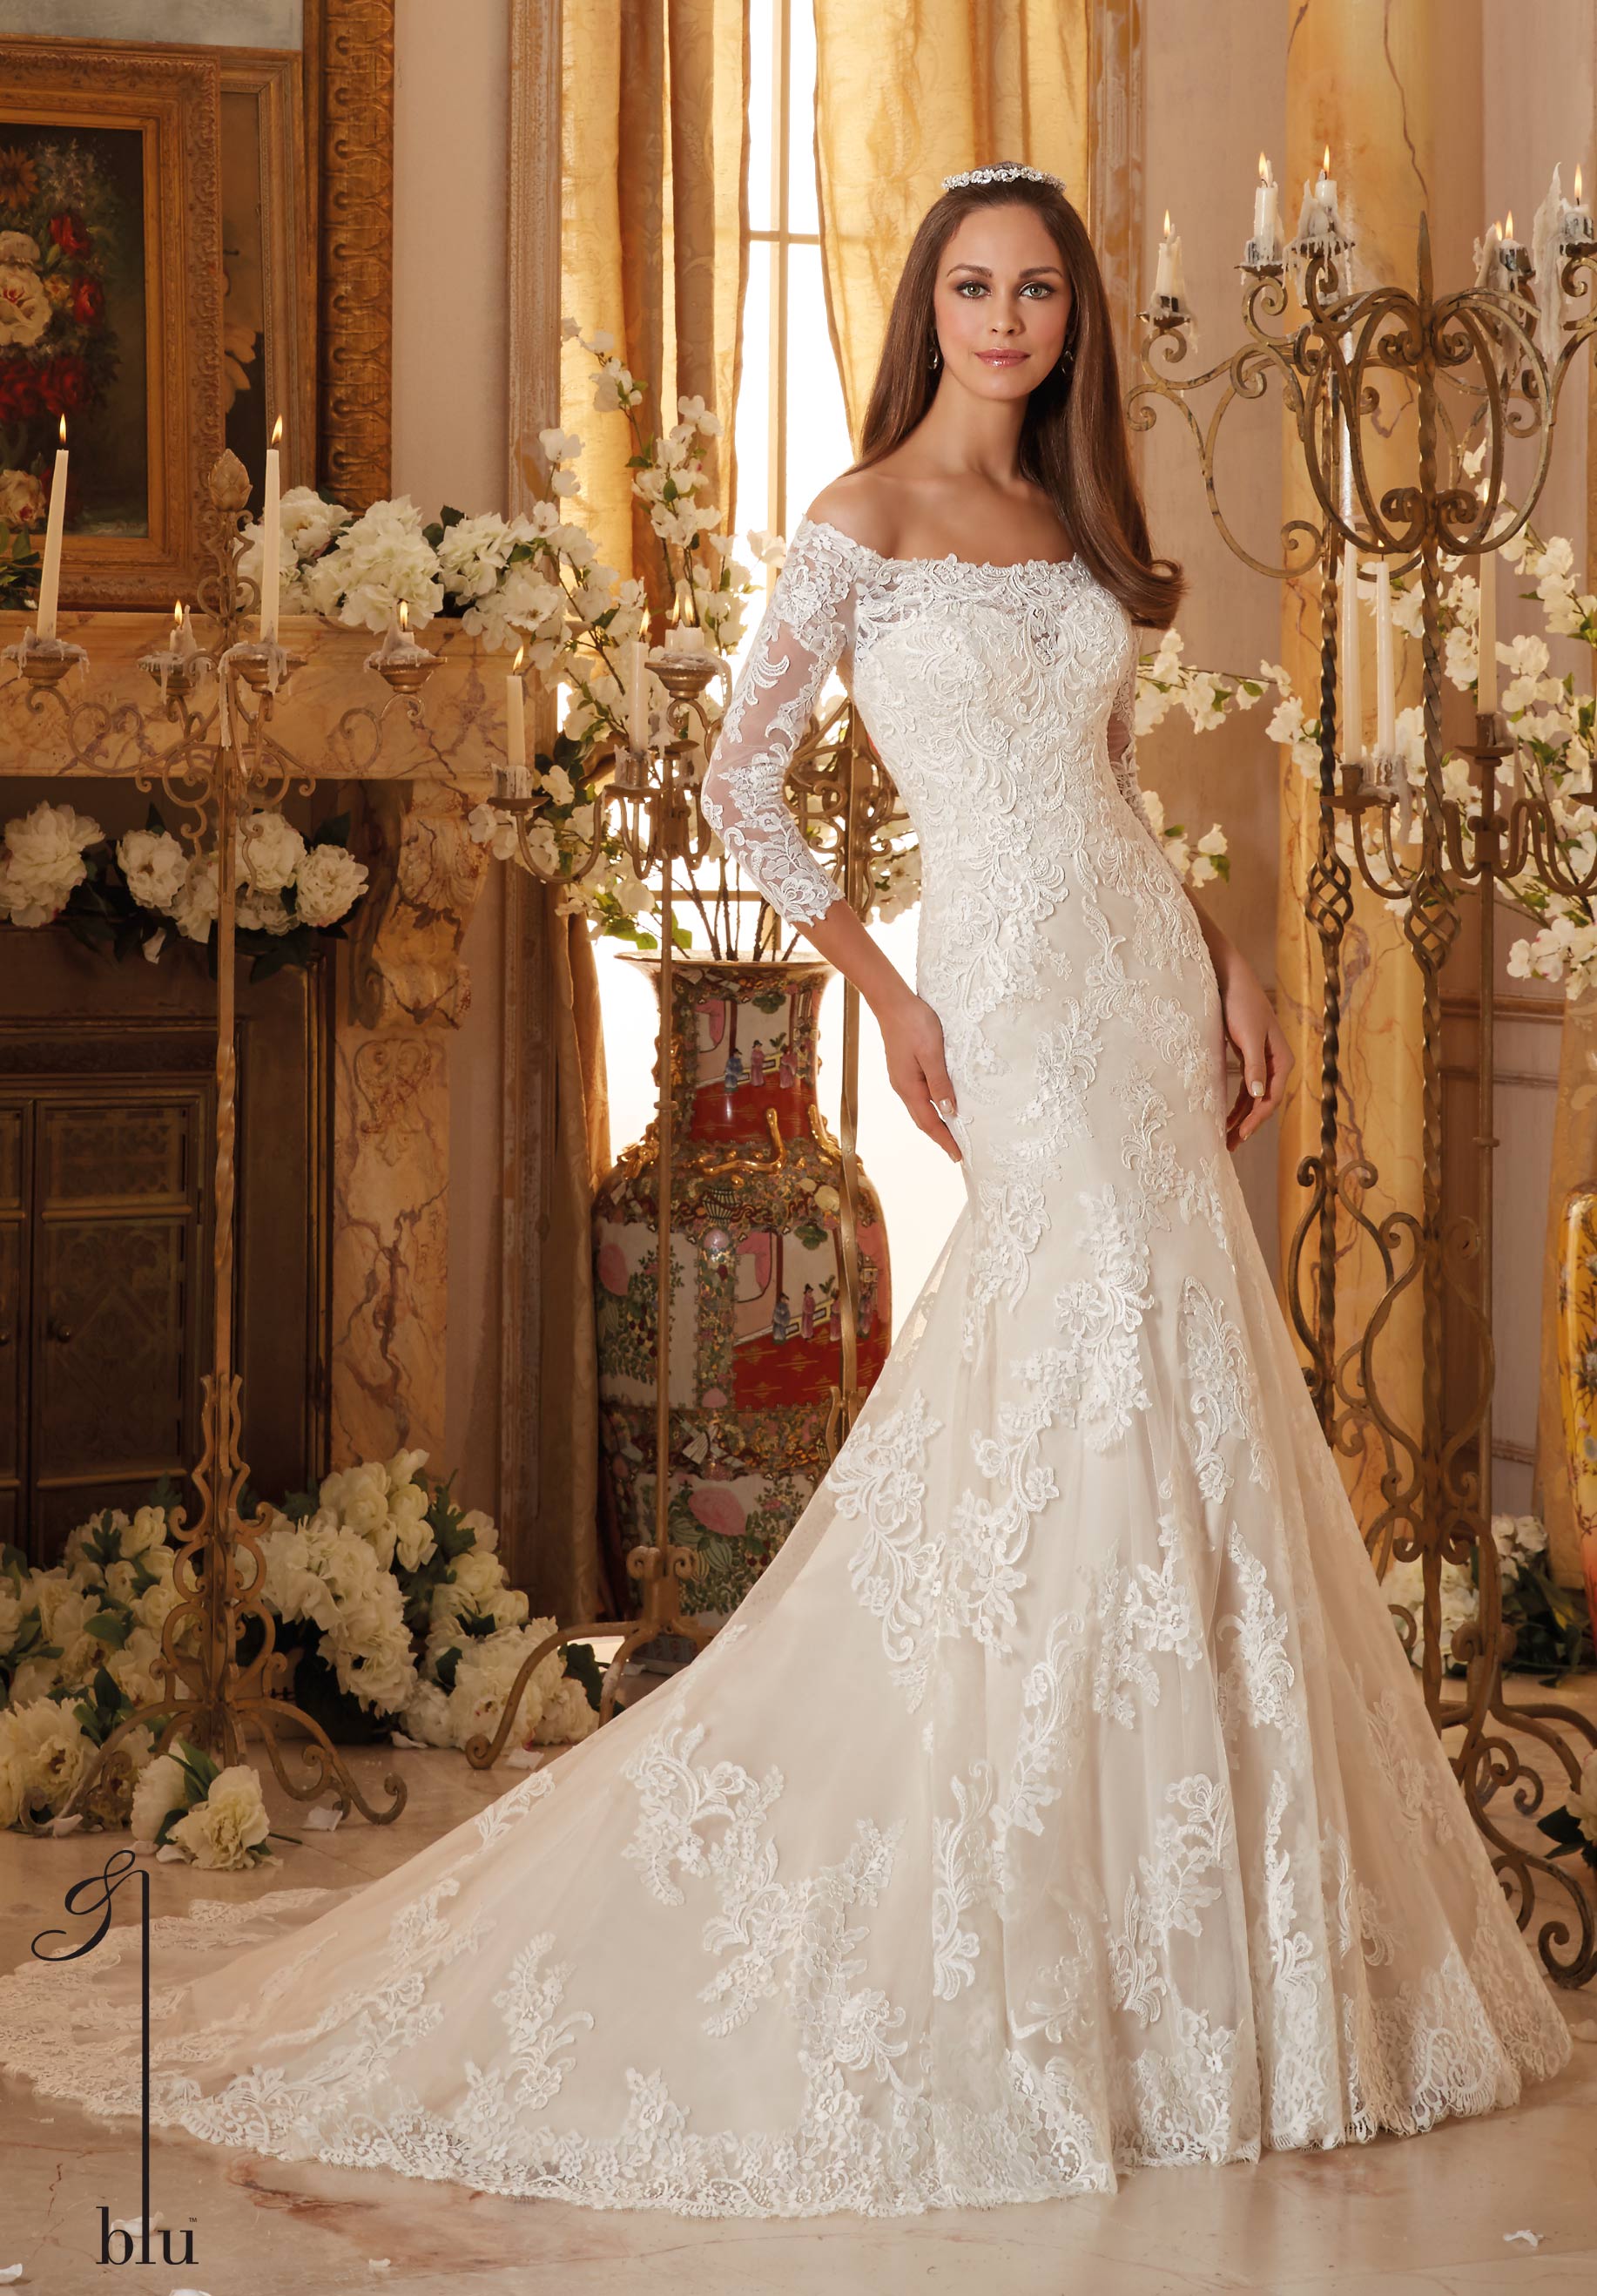 Best Wedding Dress Types Of All Time The Ultimate Guide Blackwedding3